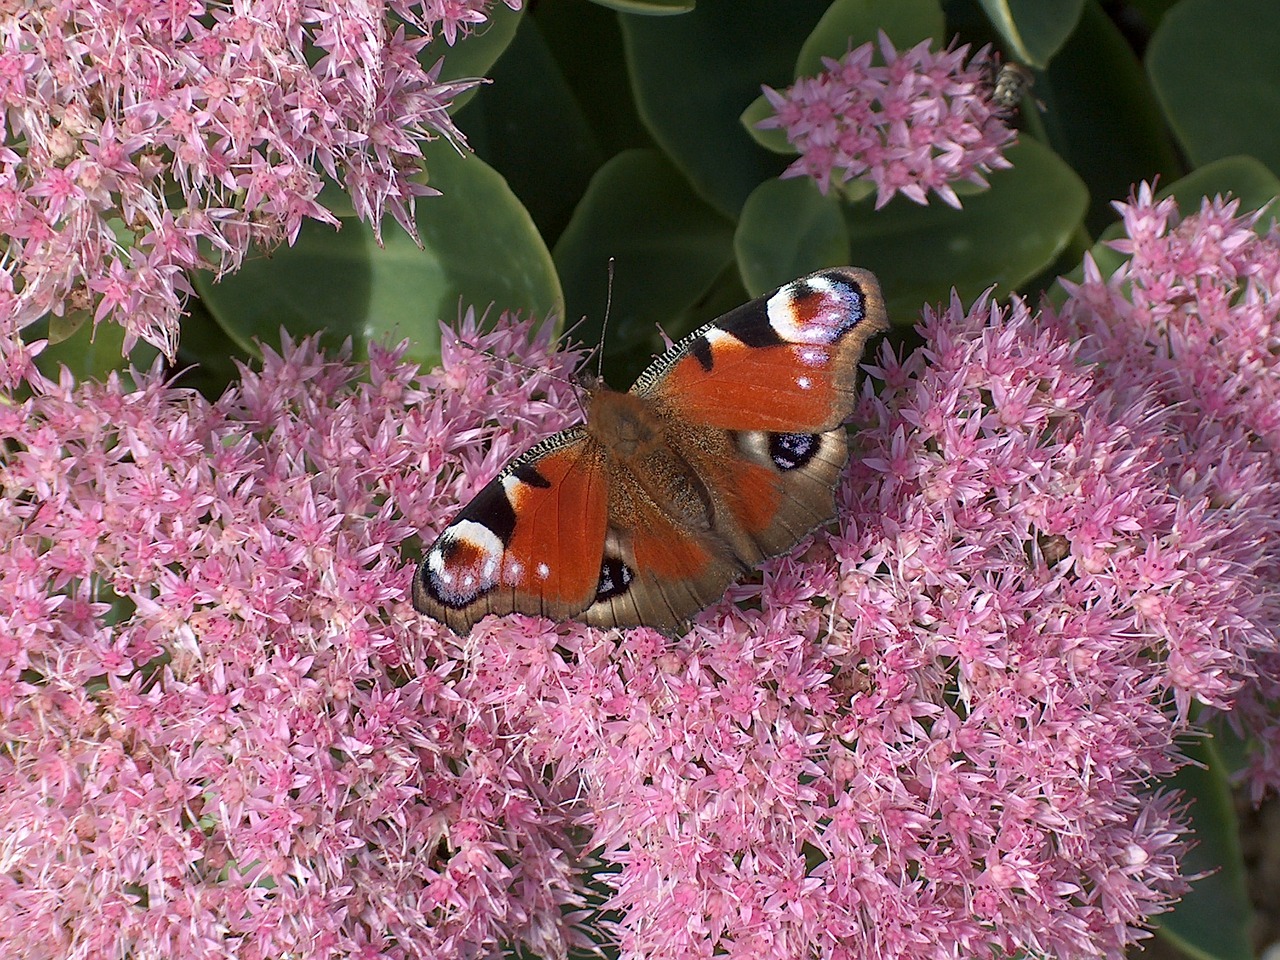 painted peacock sedum butterfly free photo